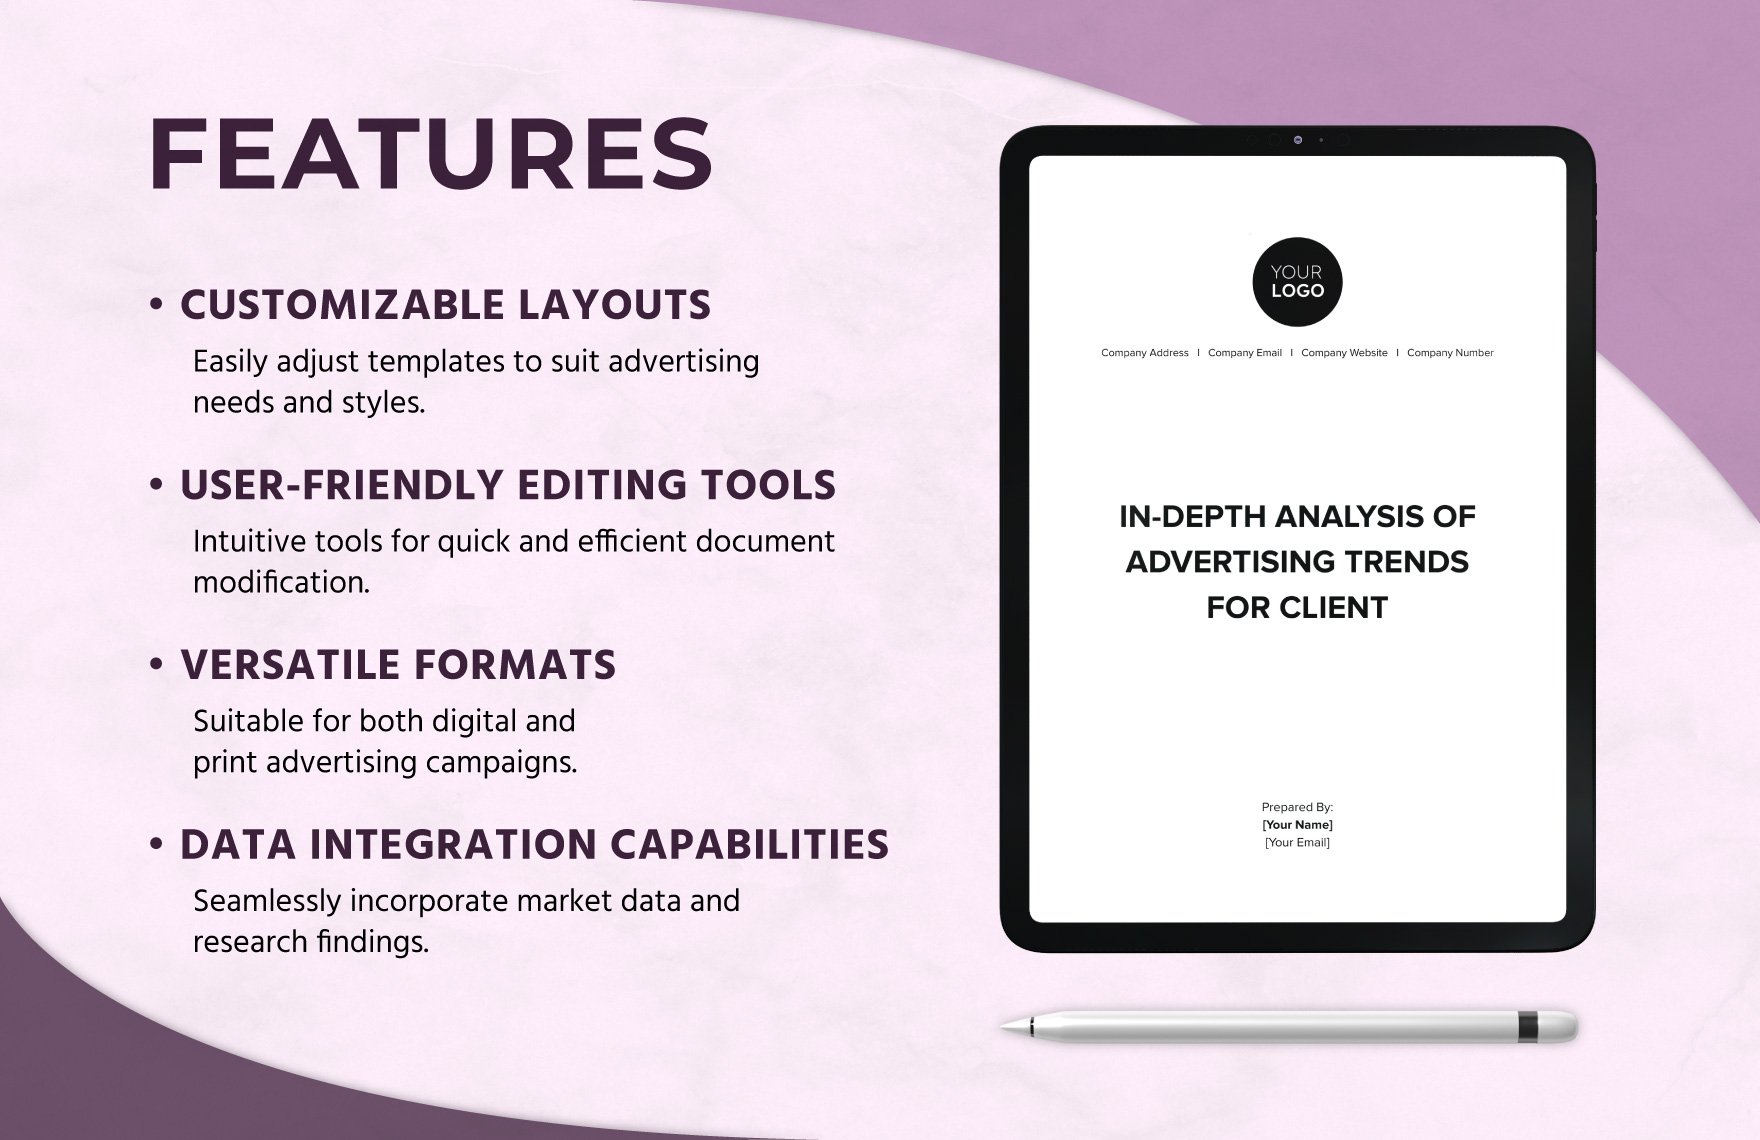 In-Depth Analysis of Advertising Trends for Client Template